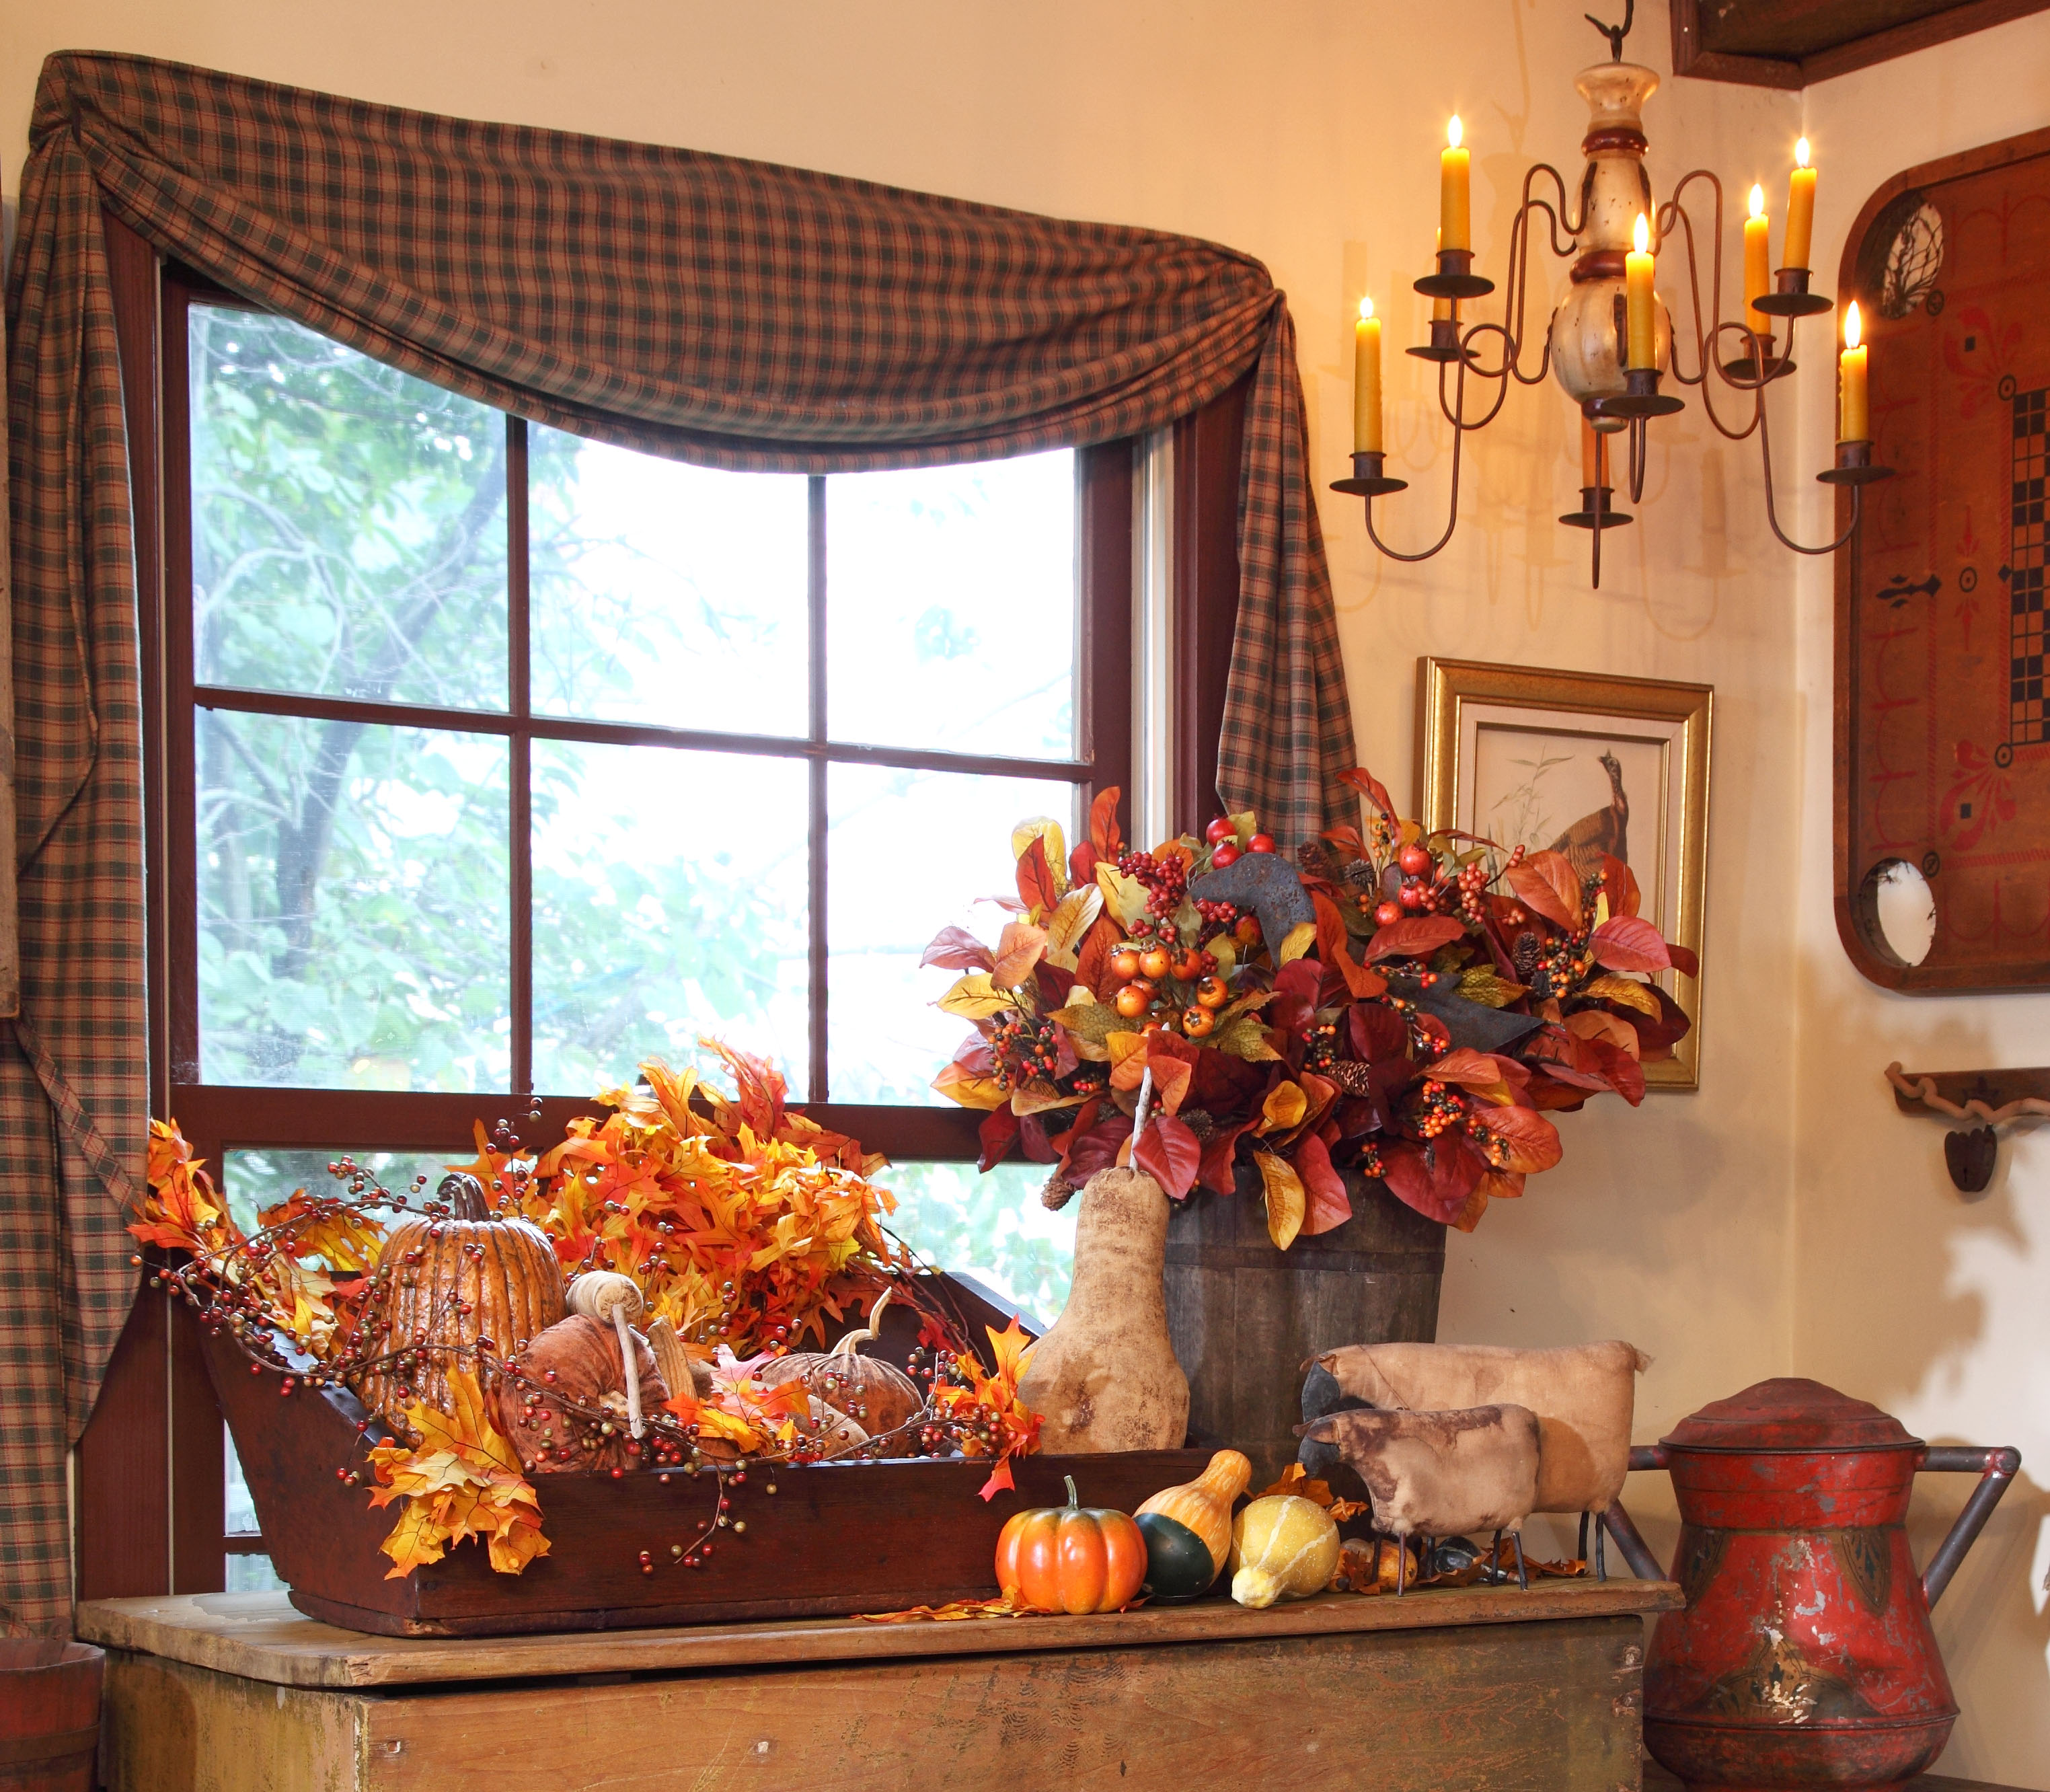 3 Quick Fall Decorating Tips | Total Mortgage Blog